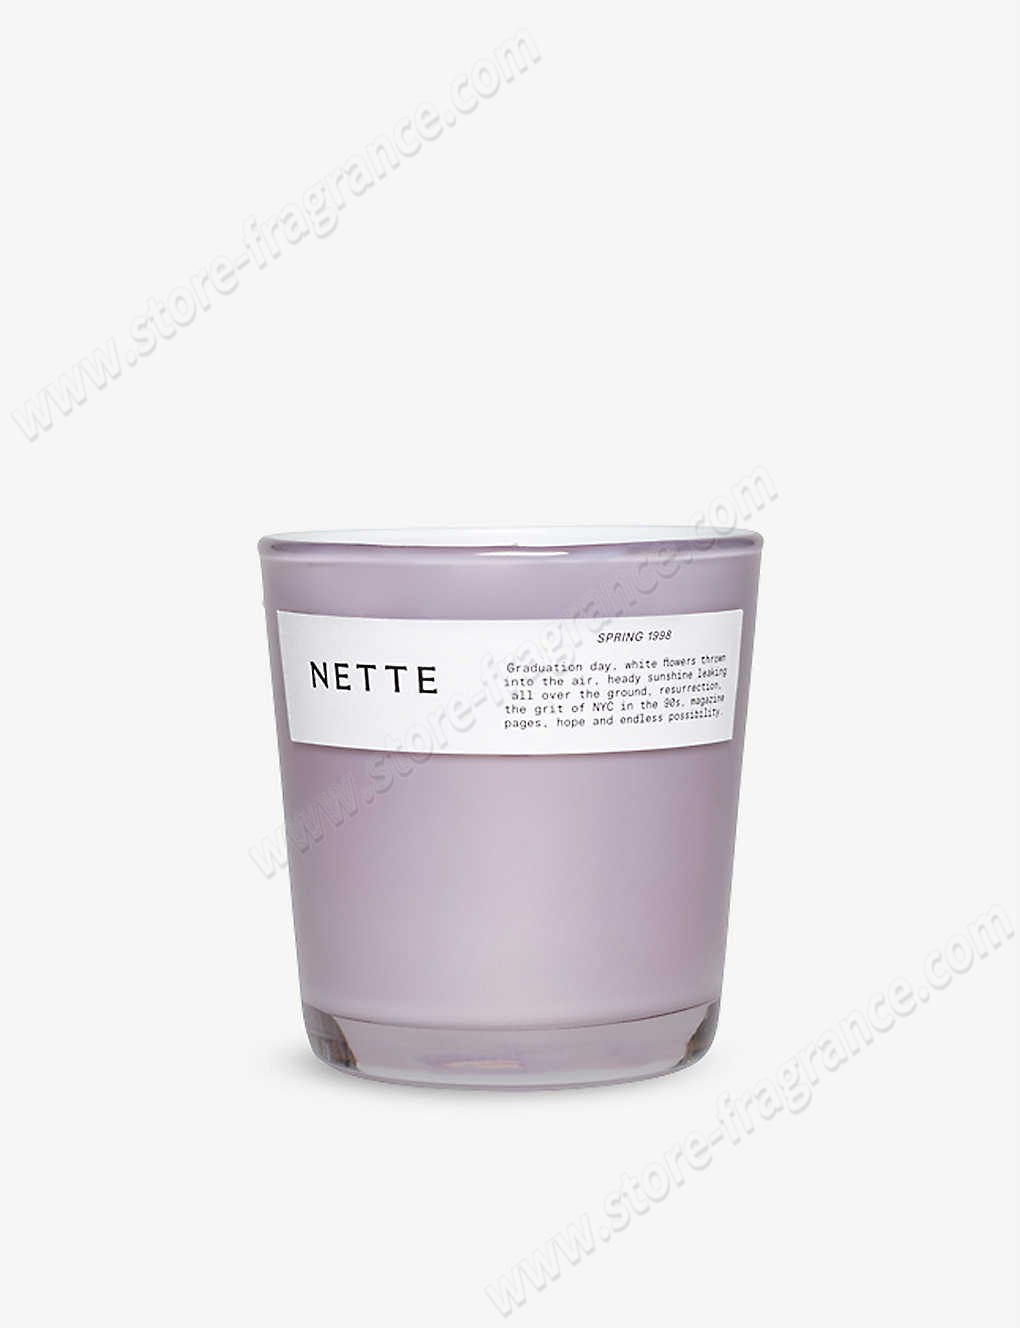 NETTE/Spring 1998 scented candle 20.6oz ✿ Discount Store - -0